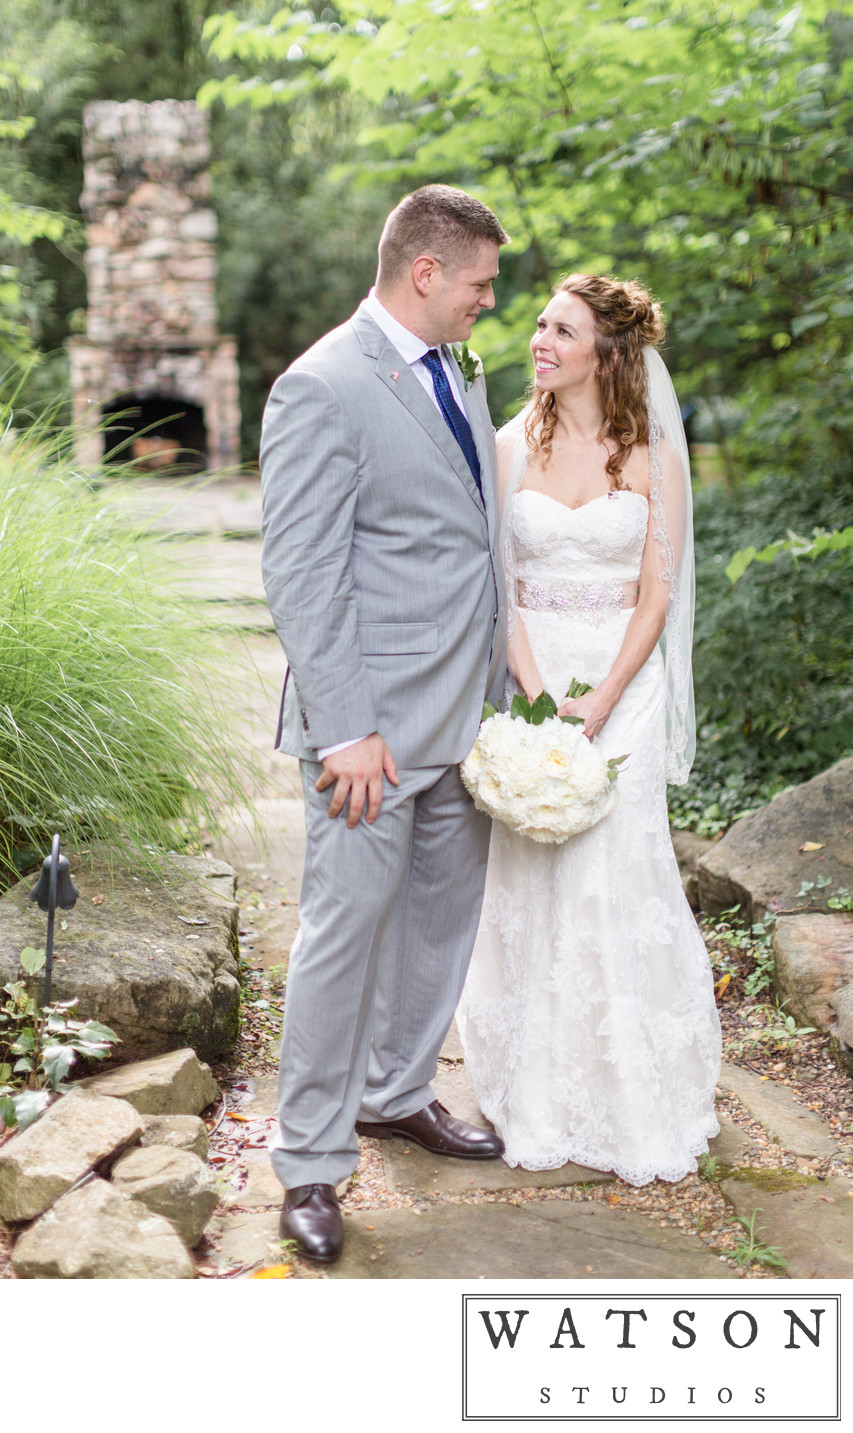 Weddings in the Smoky Mountains